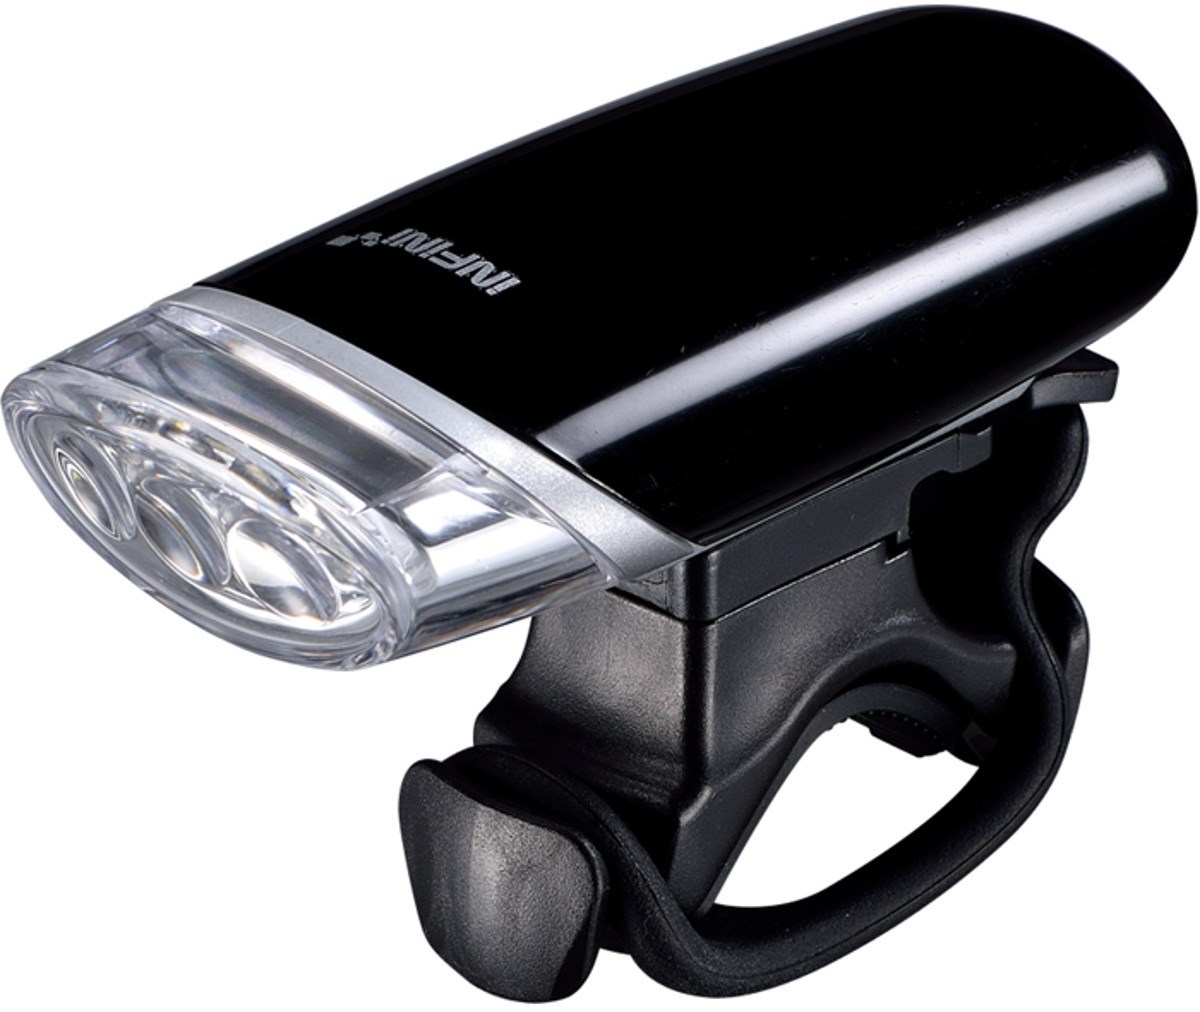 Infini Luxo 3 LED Front Light With Batteries and Bracket product image